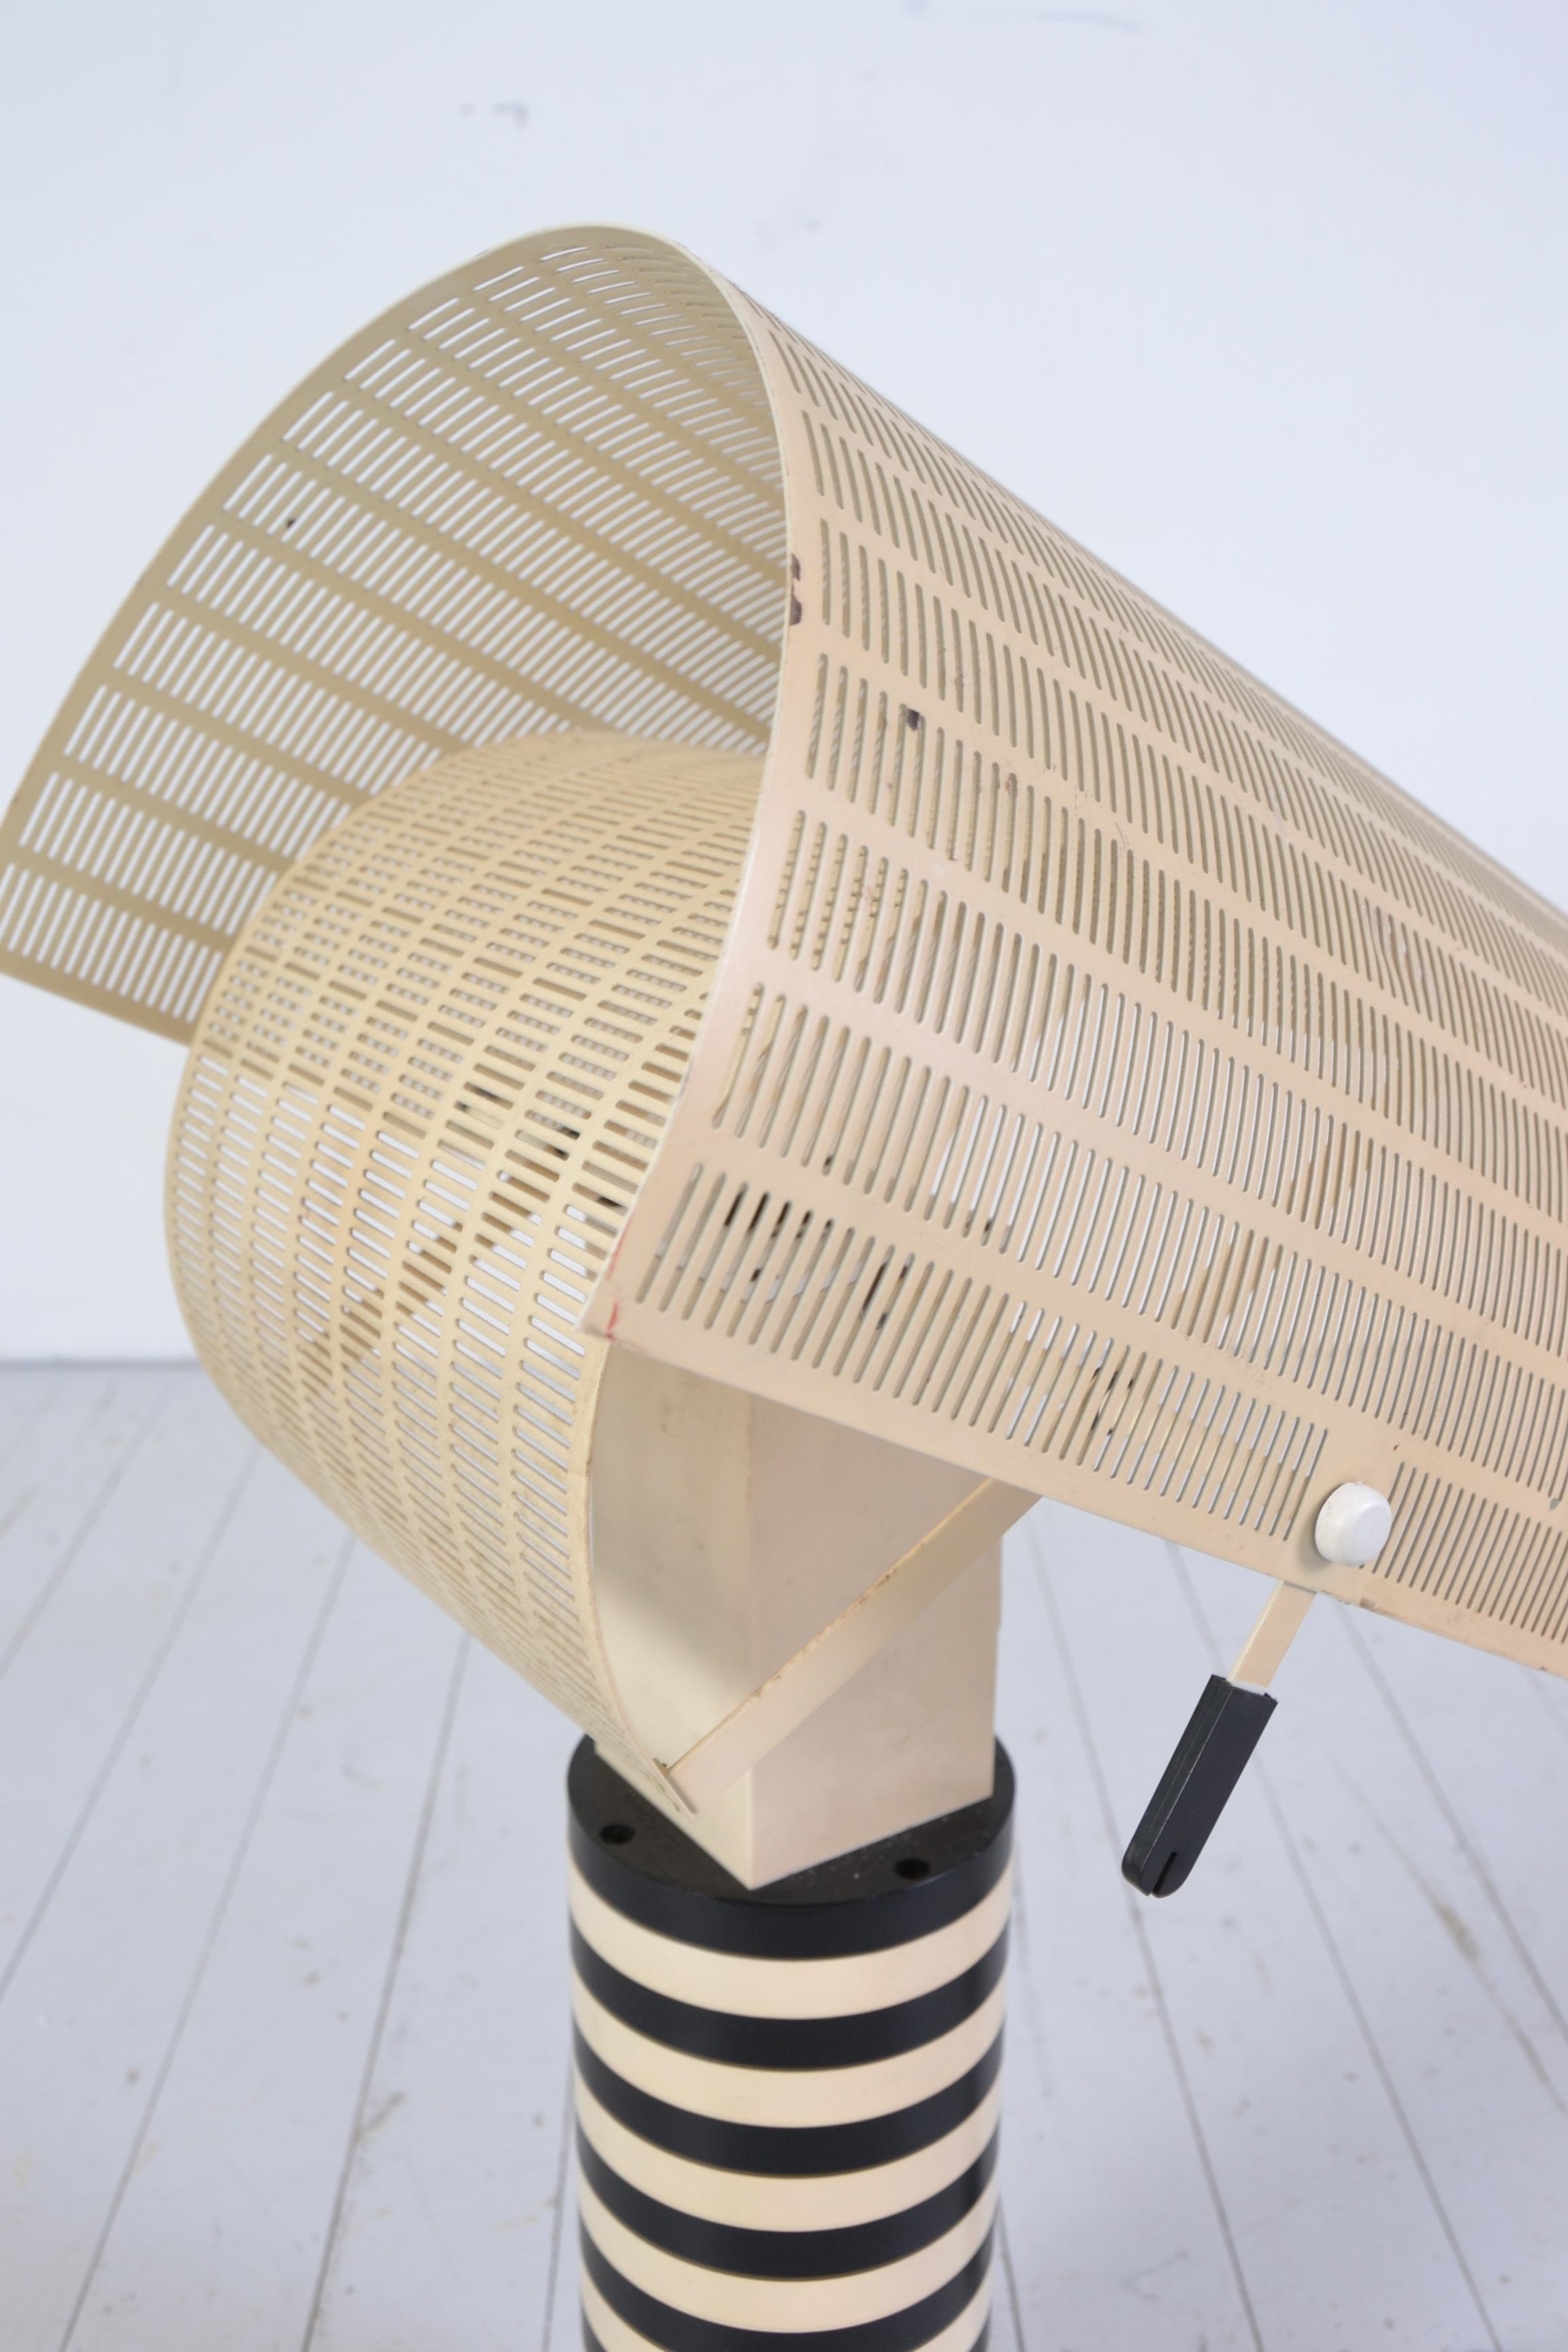 Late 20th Century Mario Botta Shogung Lamp 1st Edition 1986 by Artemide For Sale